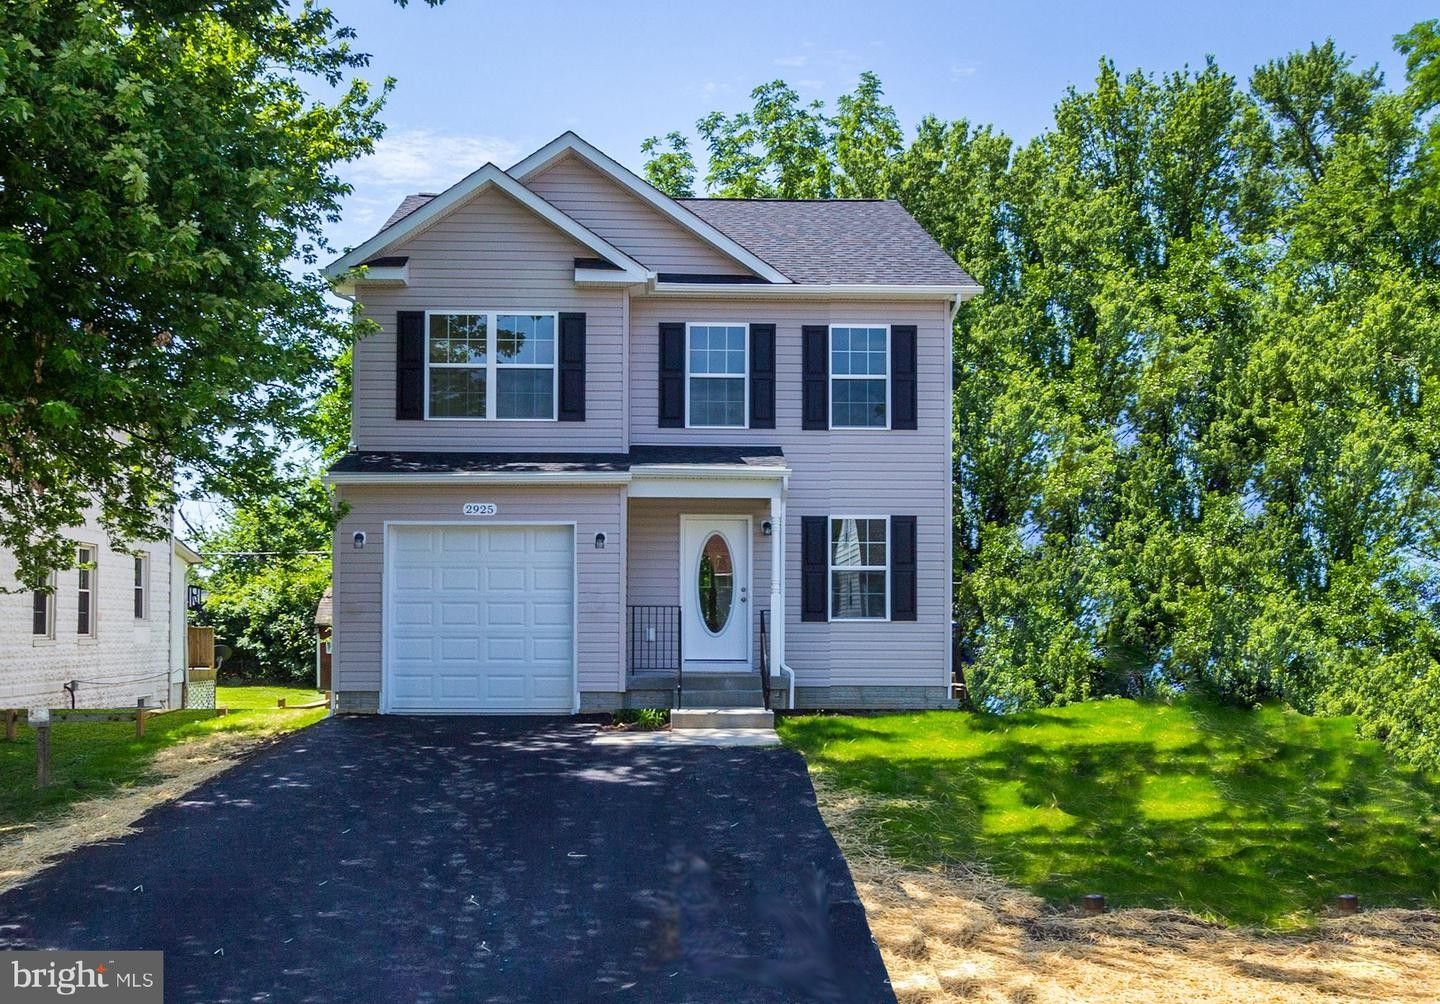 Lot 41 Cissell Ave. Laurel, MD 20723